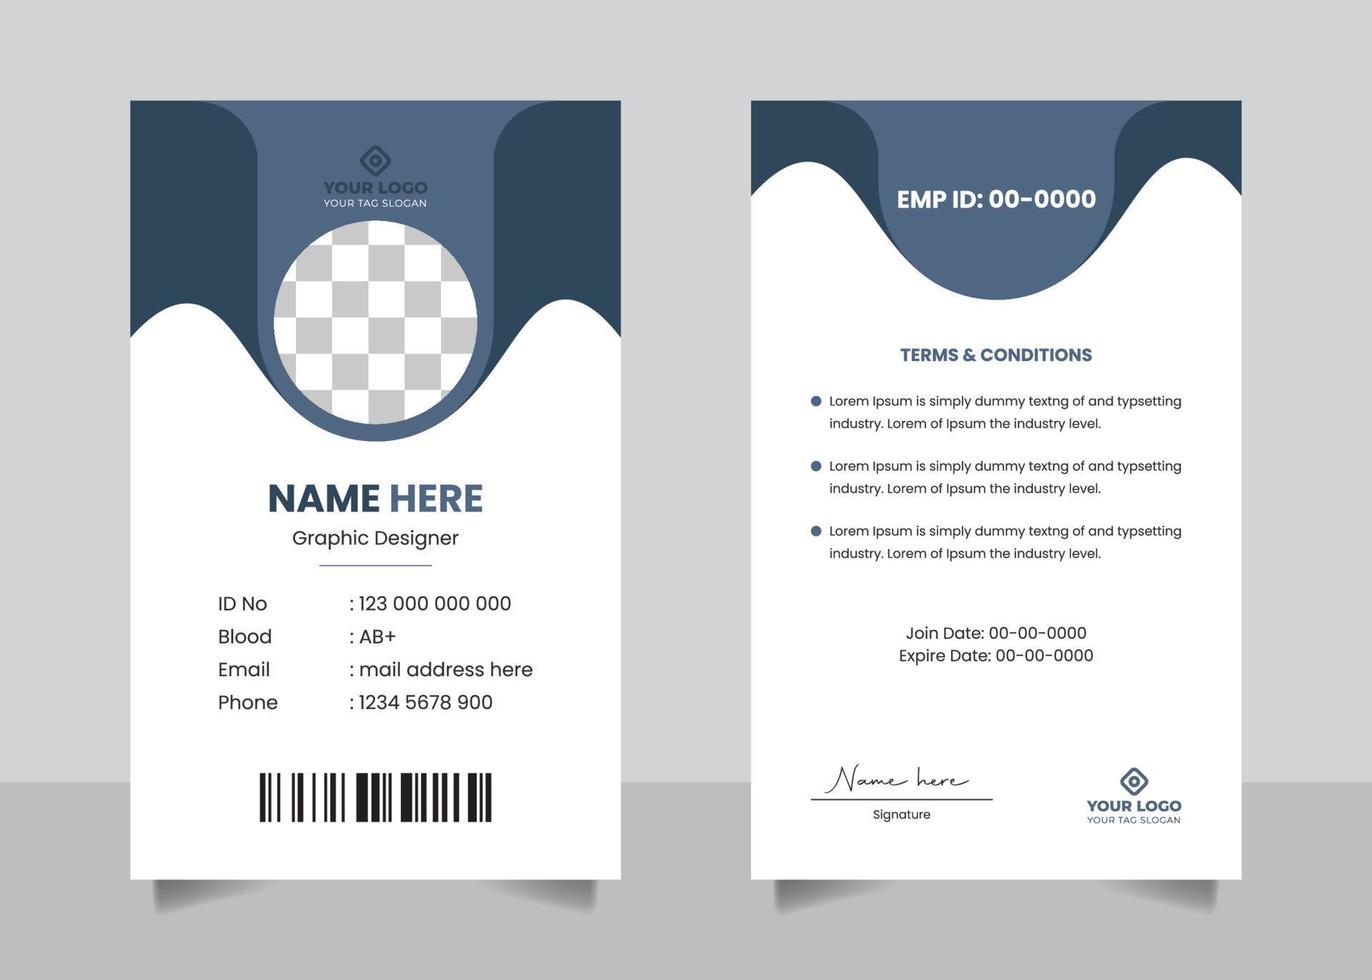 Employee staff official id card design template vector